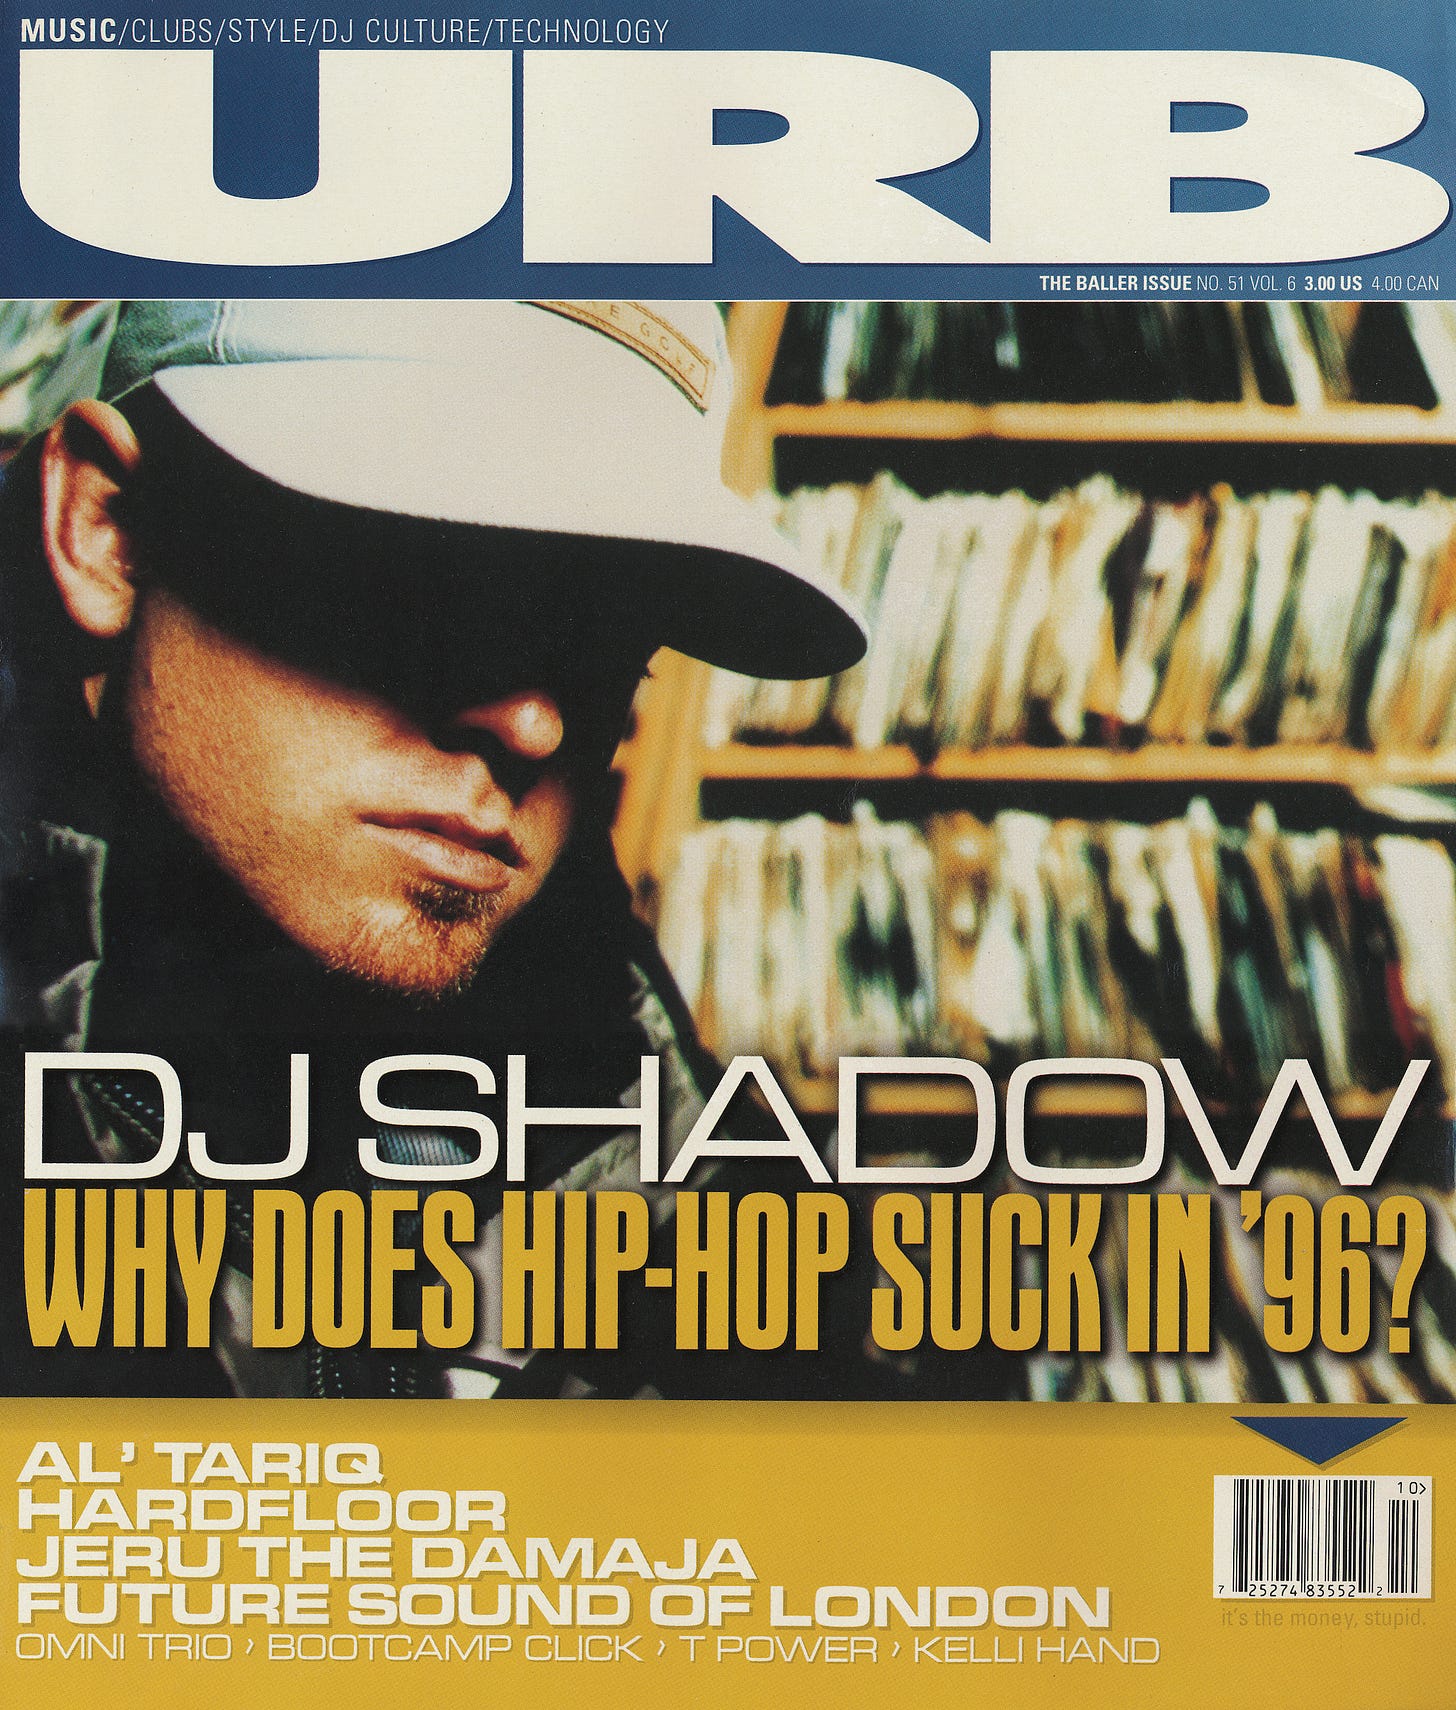 DJ Shadow on the cover of URB Magzine